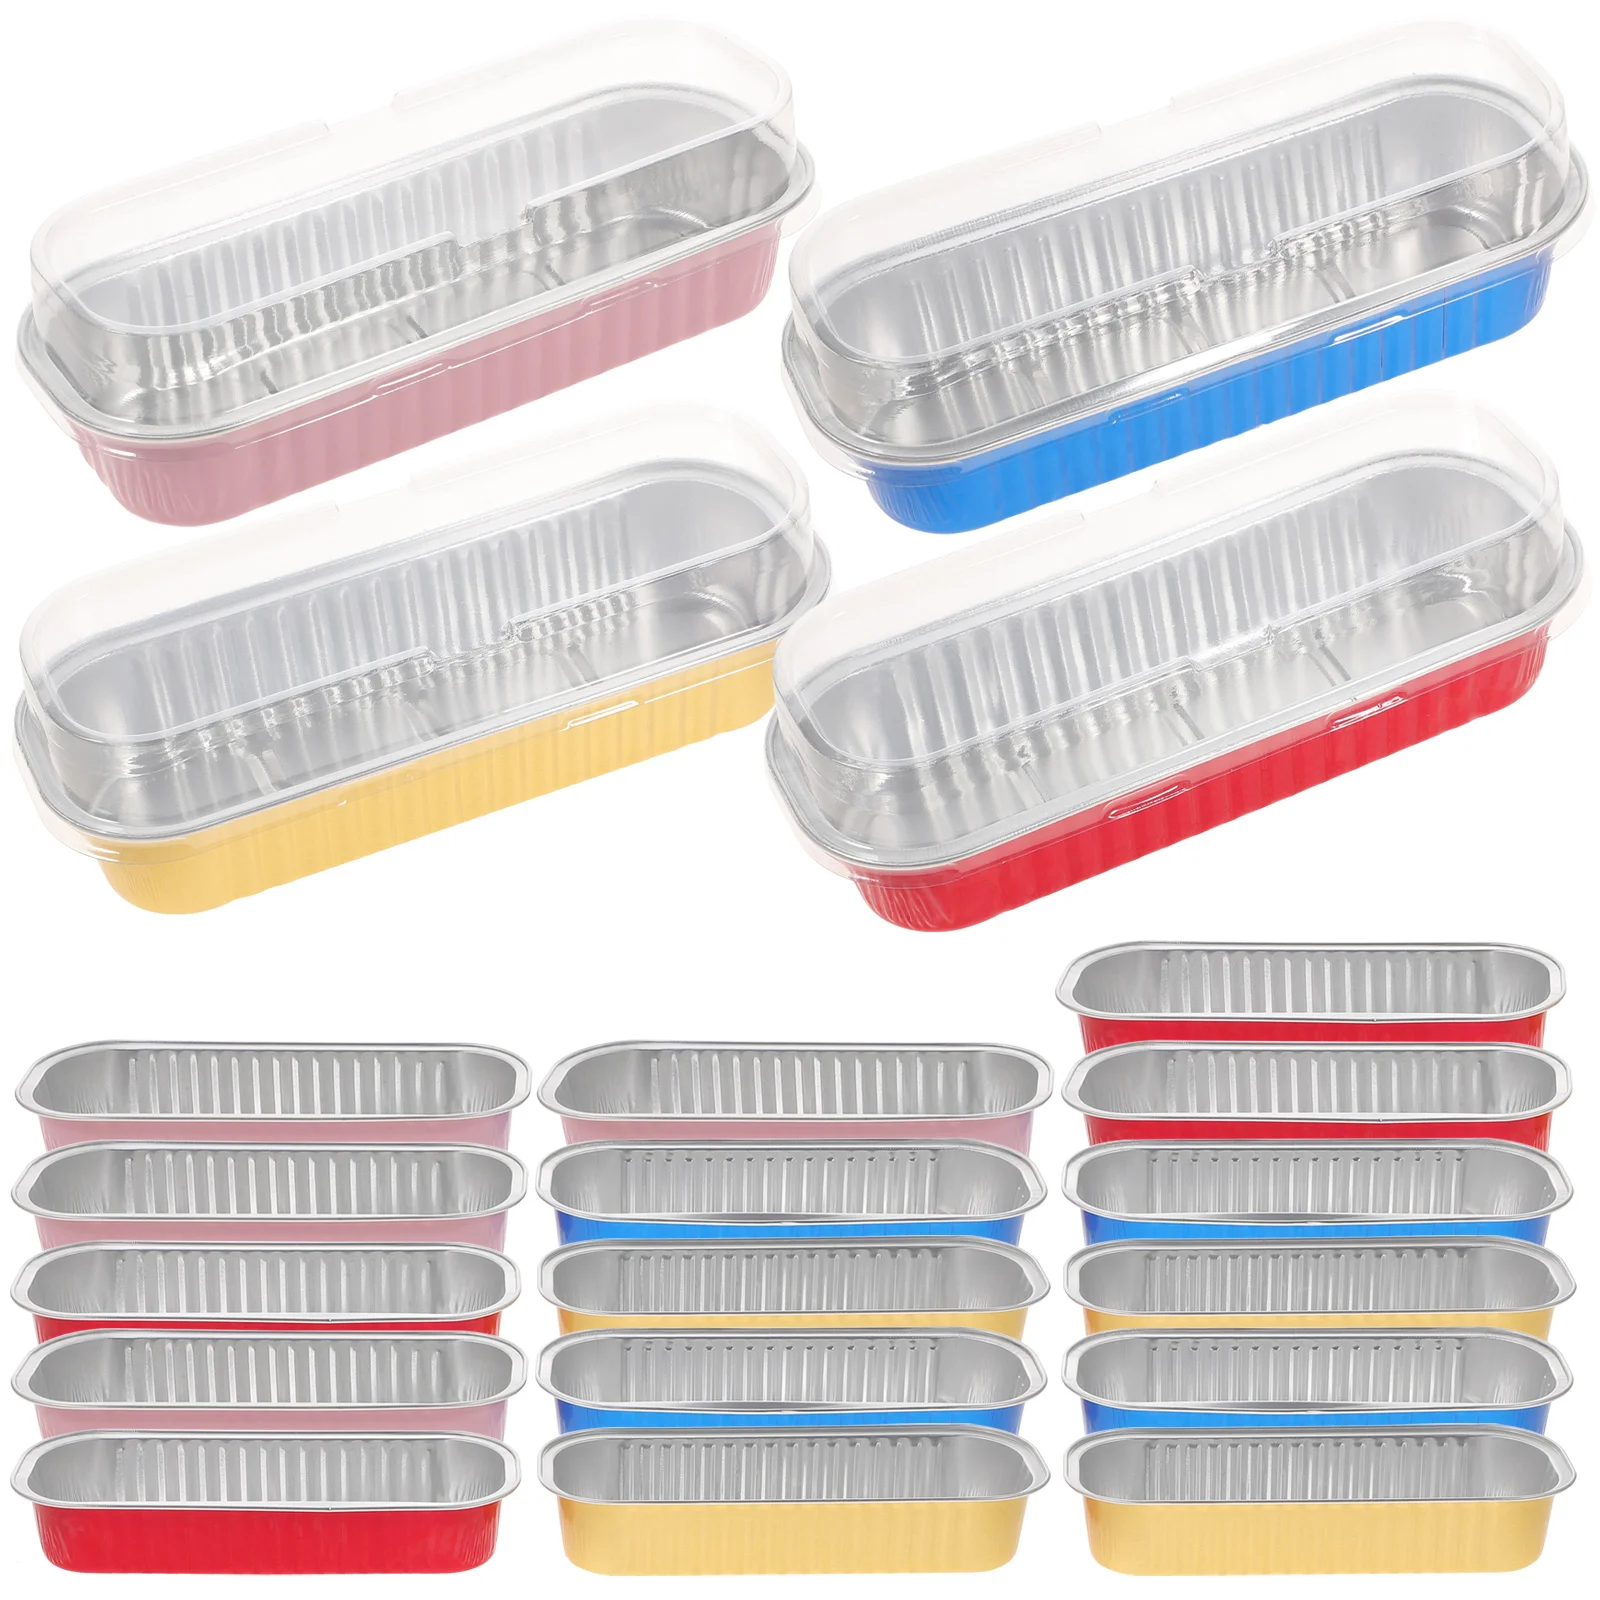 

Cups Baking Muffin Pans Pan Loaf Bread Liners Dessert Containers Cupcake Cake Tin Cup Aluminum Ramekins Tray Minipudding Holders